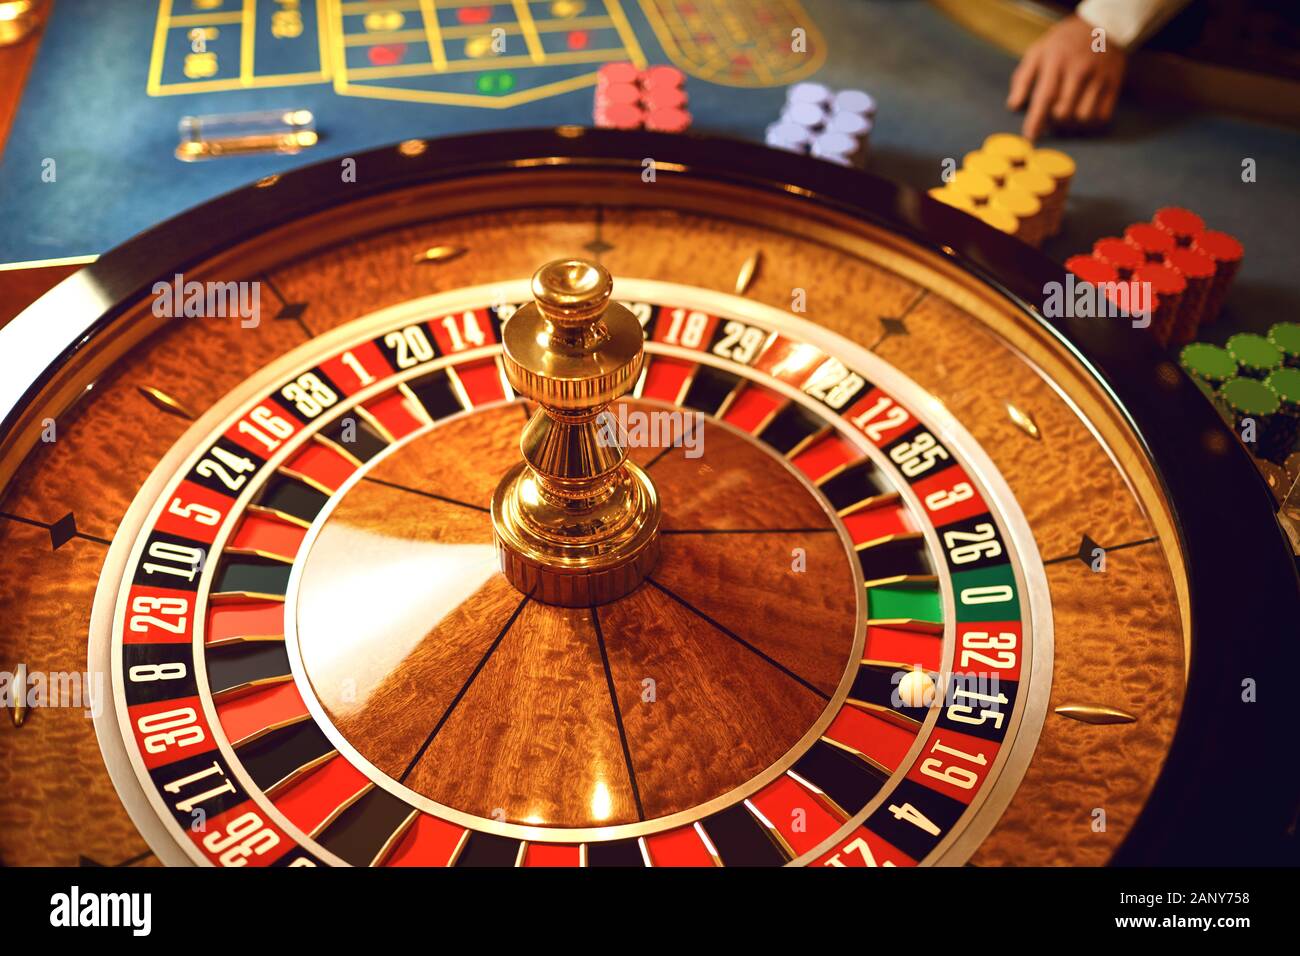 Casino Roulette High Resolution Stock Photography and Images - Alamy